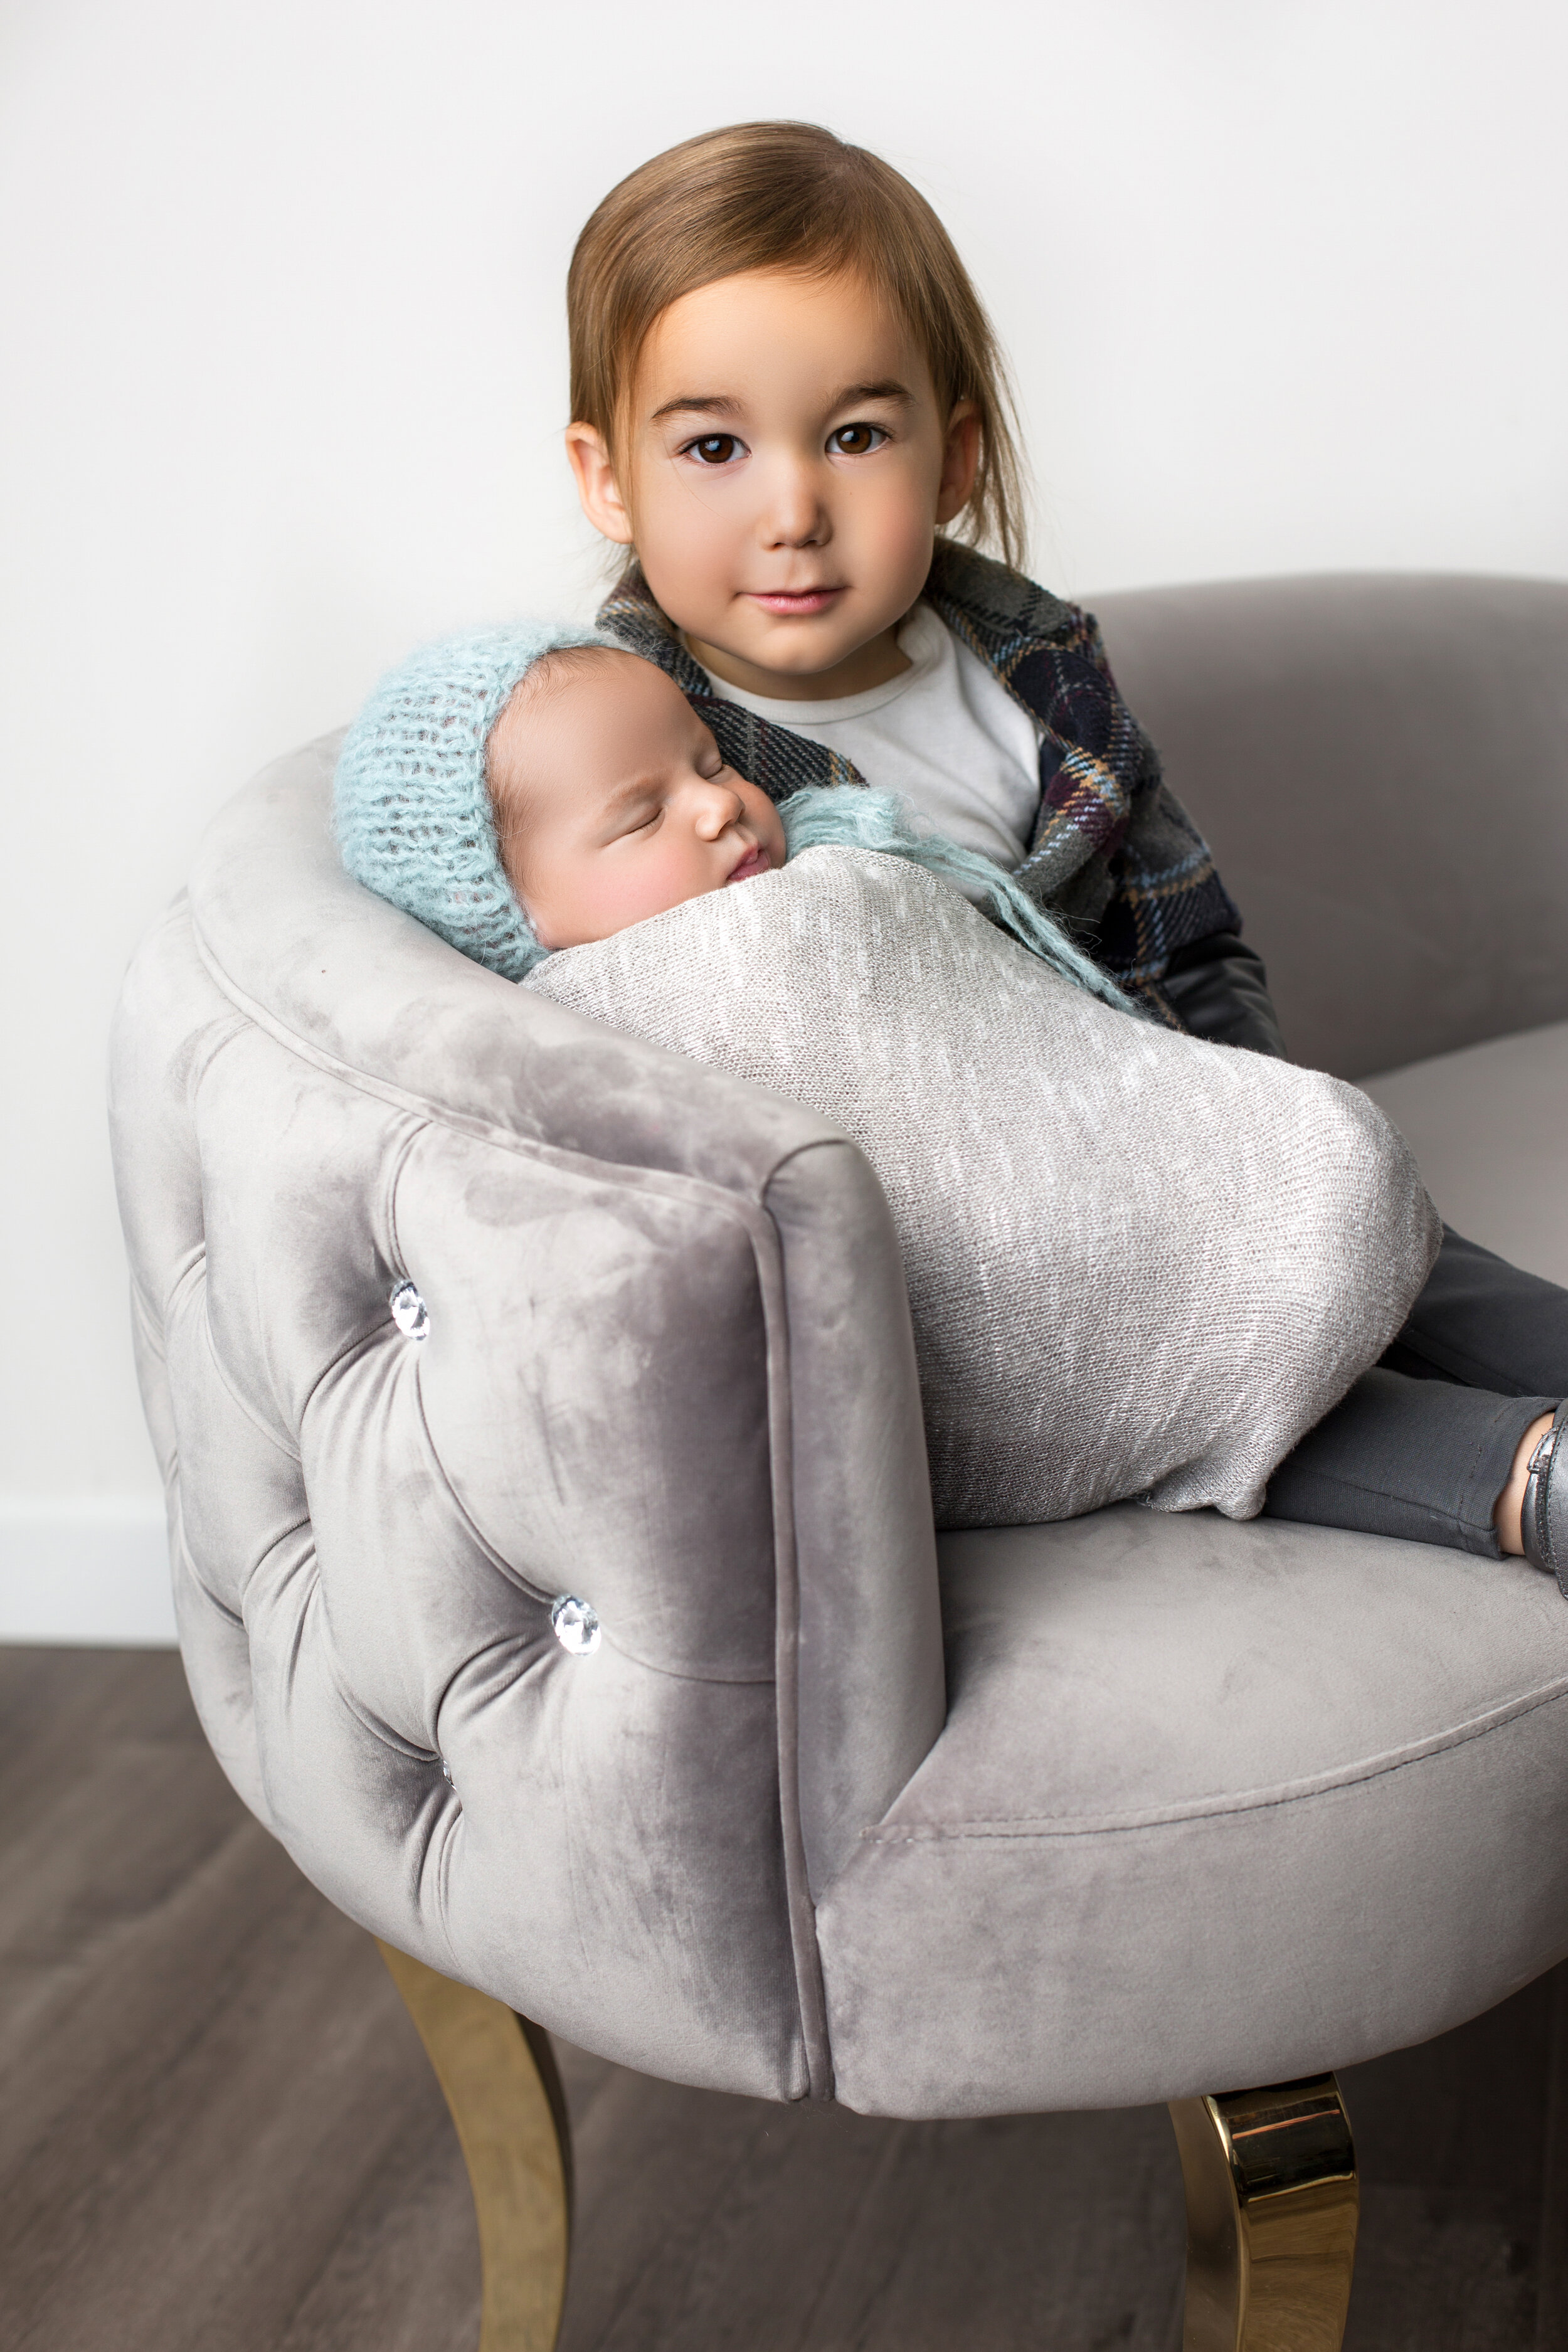 brother sits next to his newborn brother, who is propped against the back of the chair